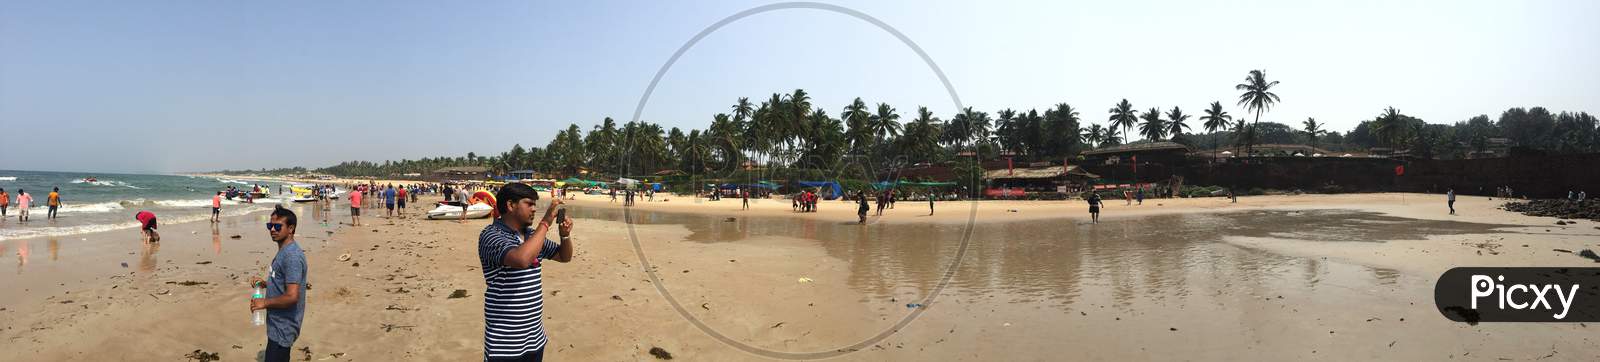 Panorama Of A Beach With Visitors